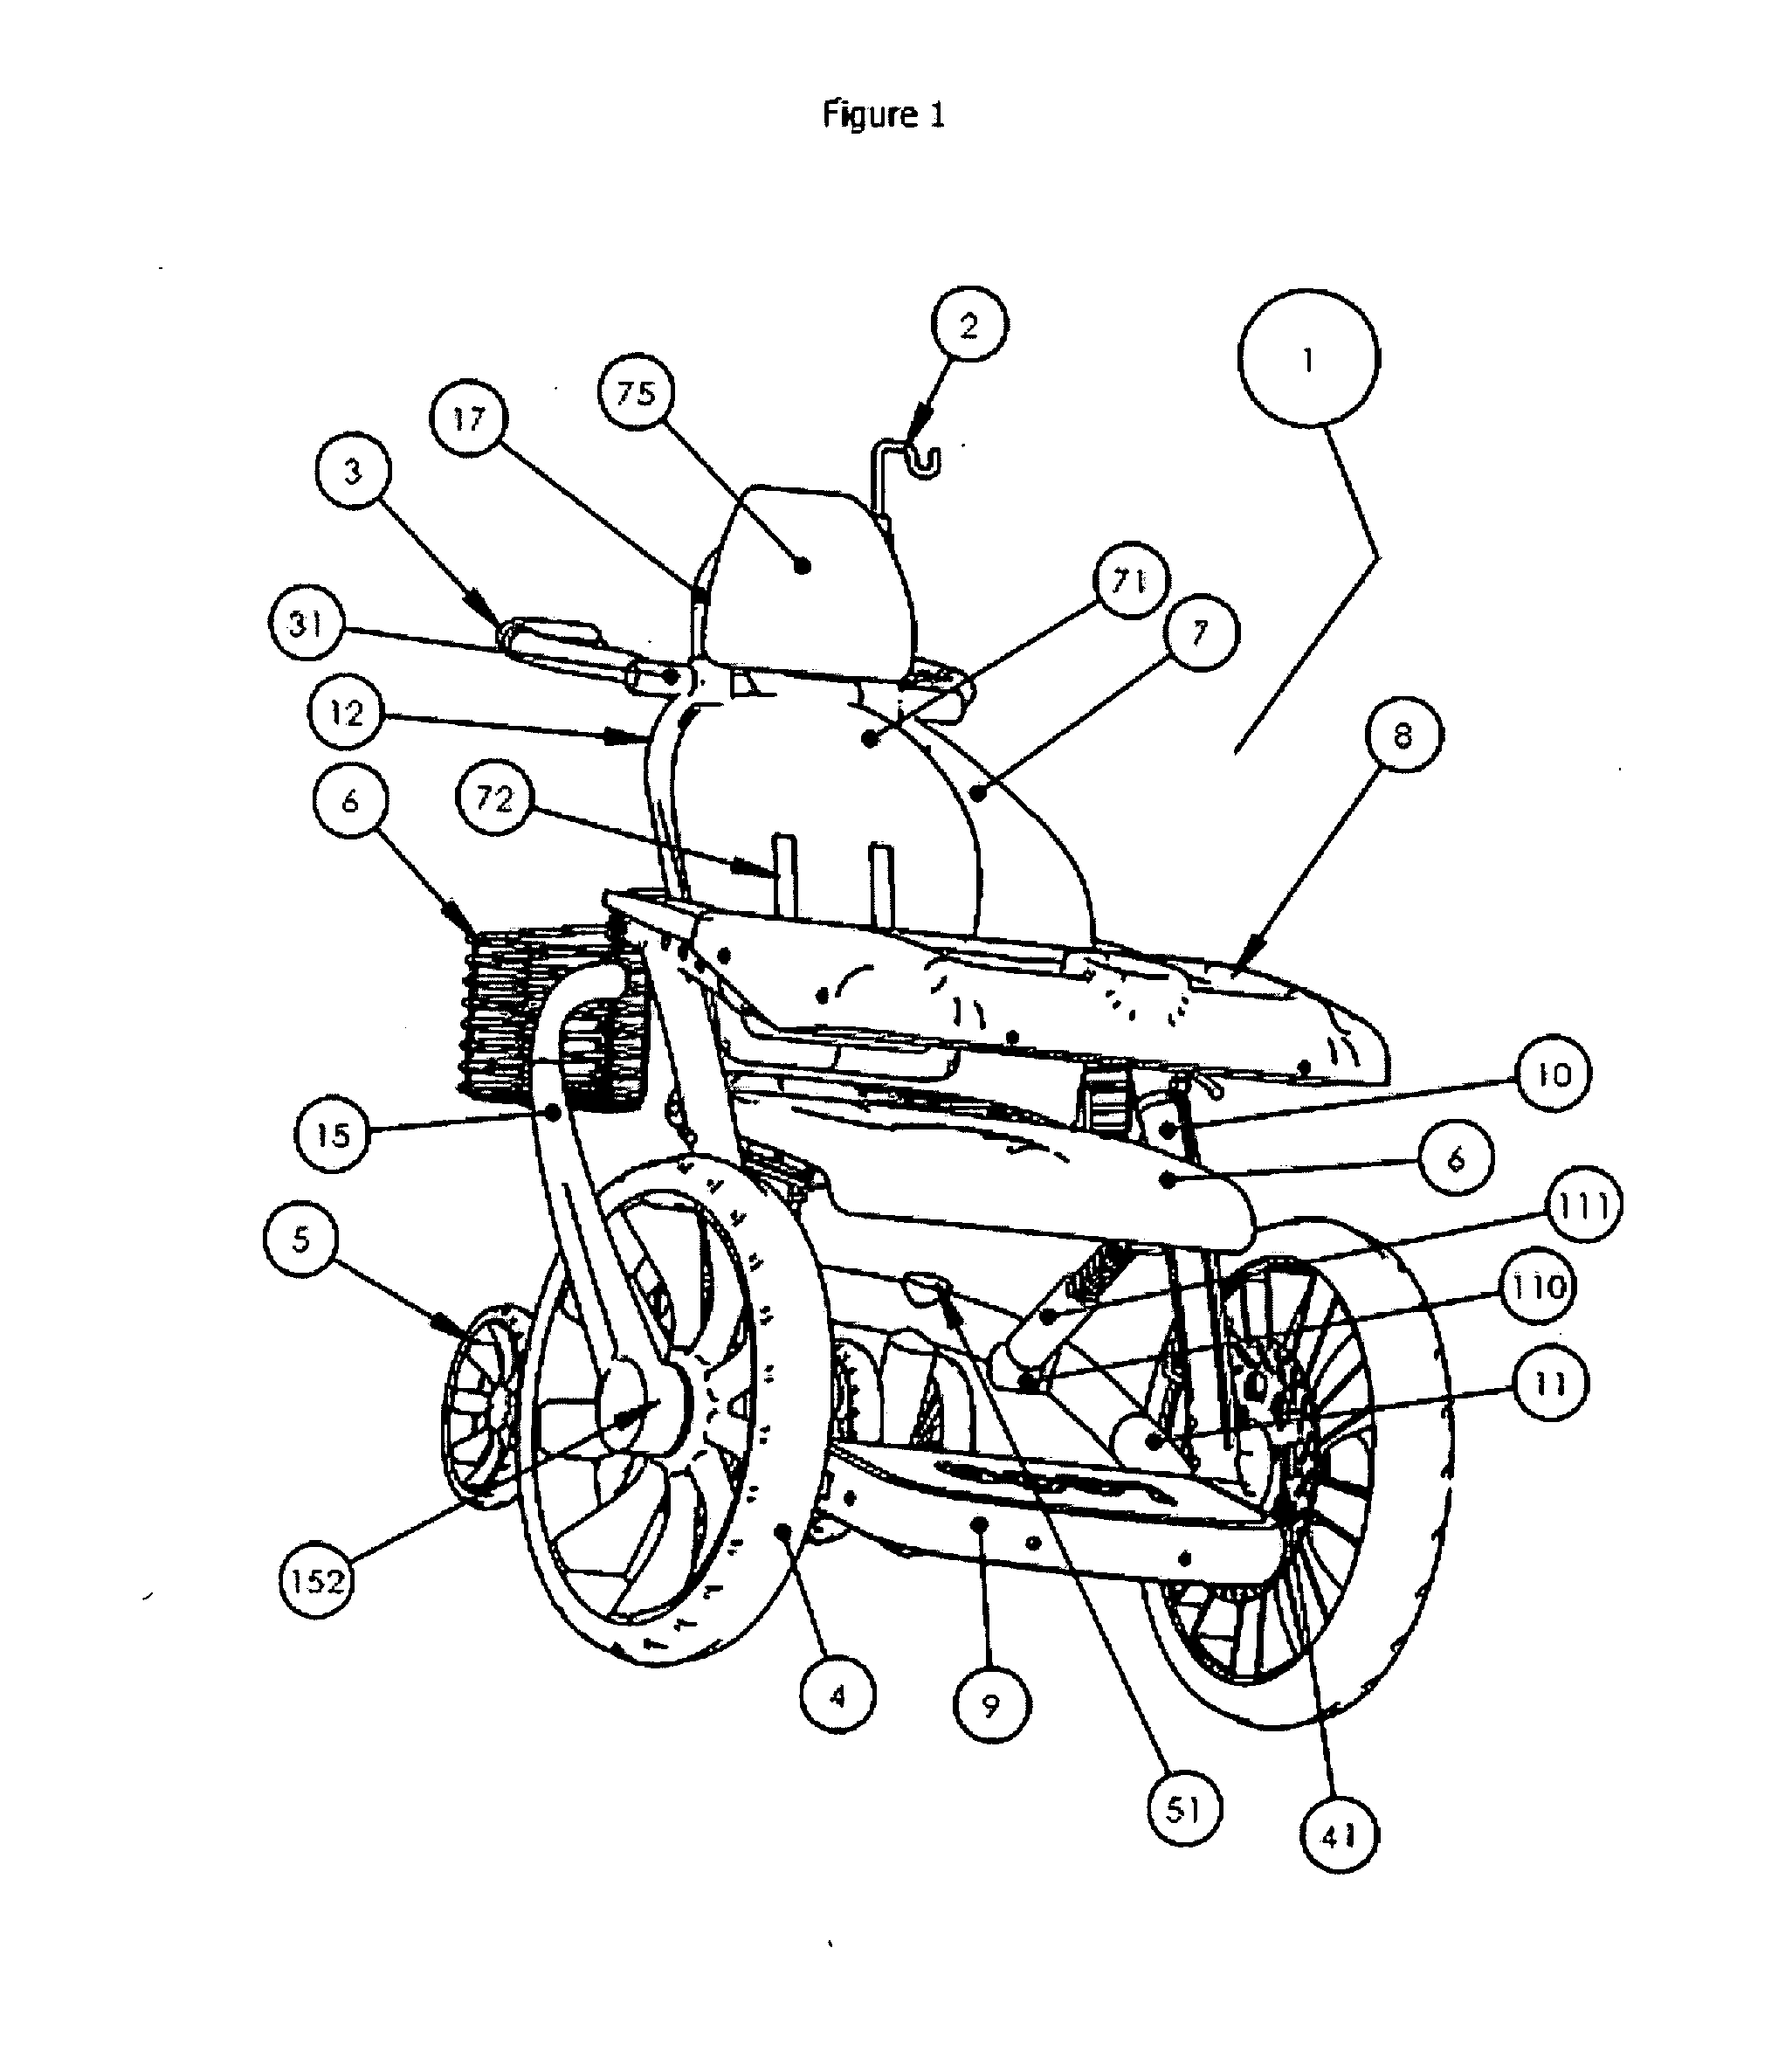 Adjustable adult mobility device